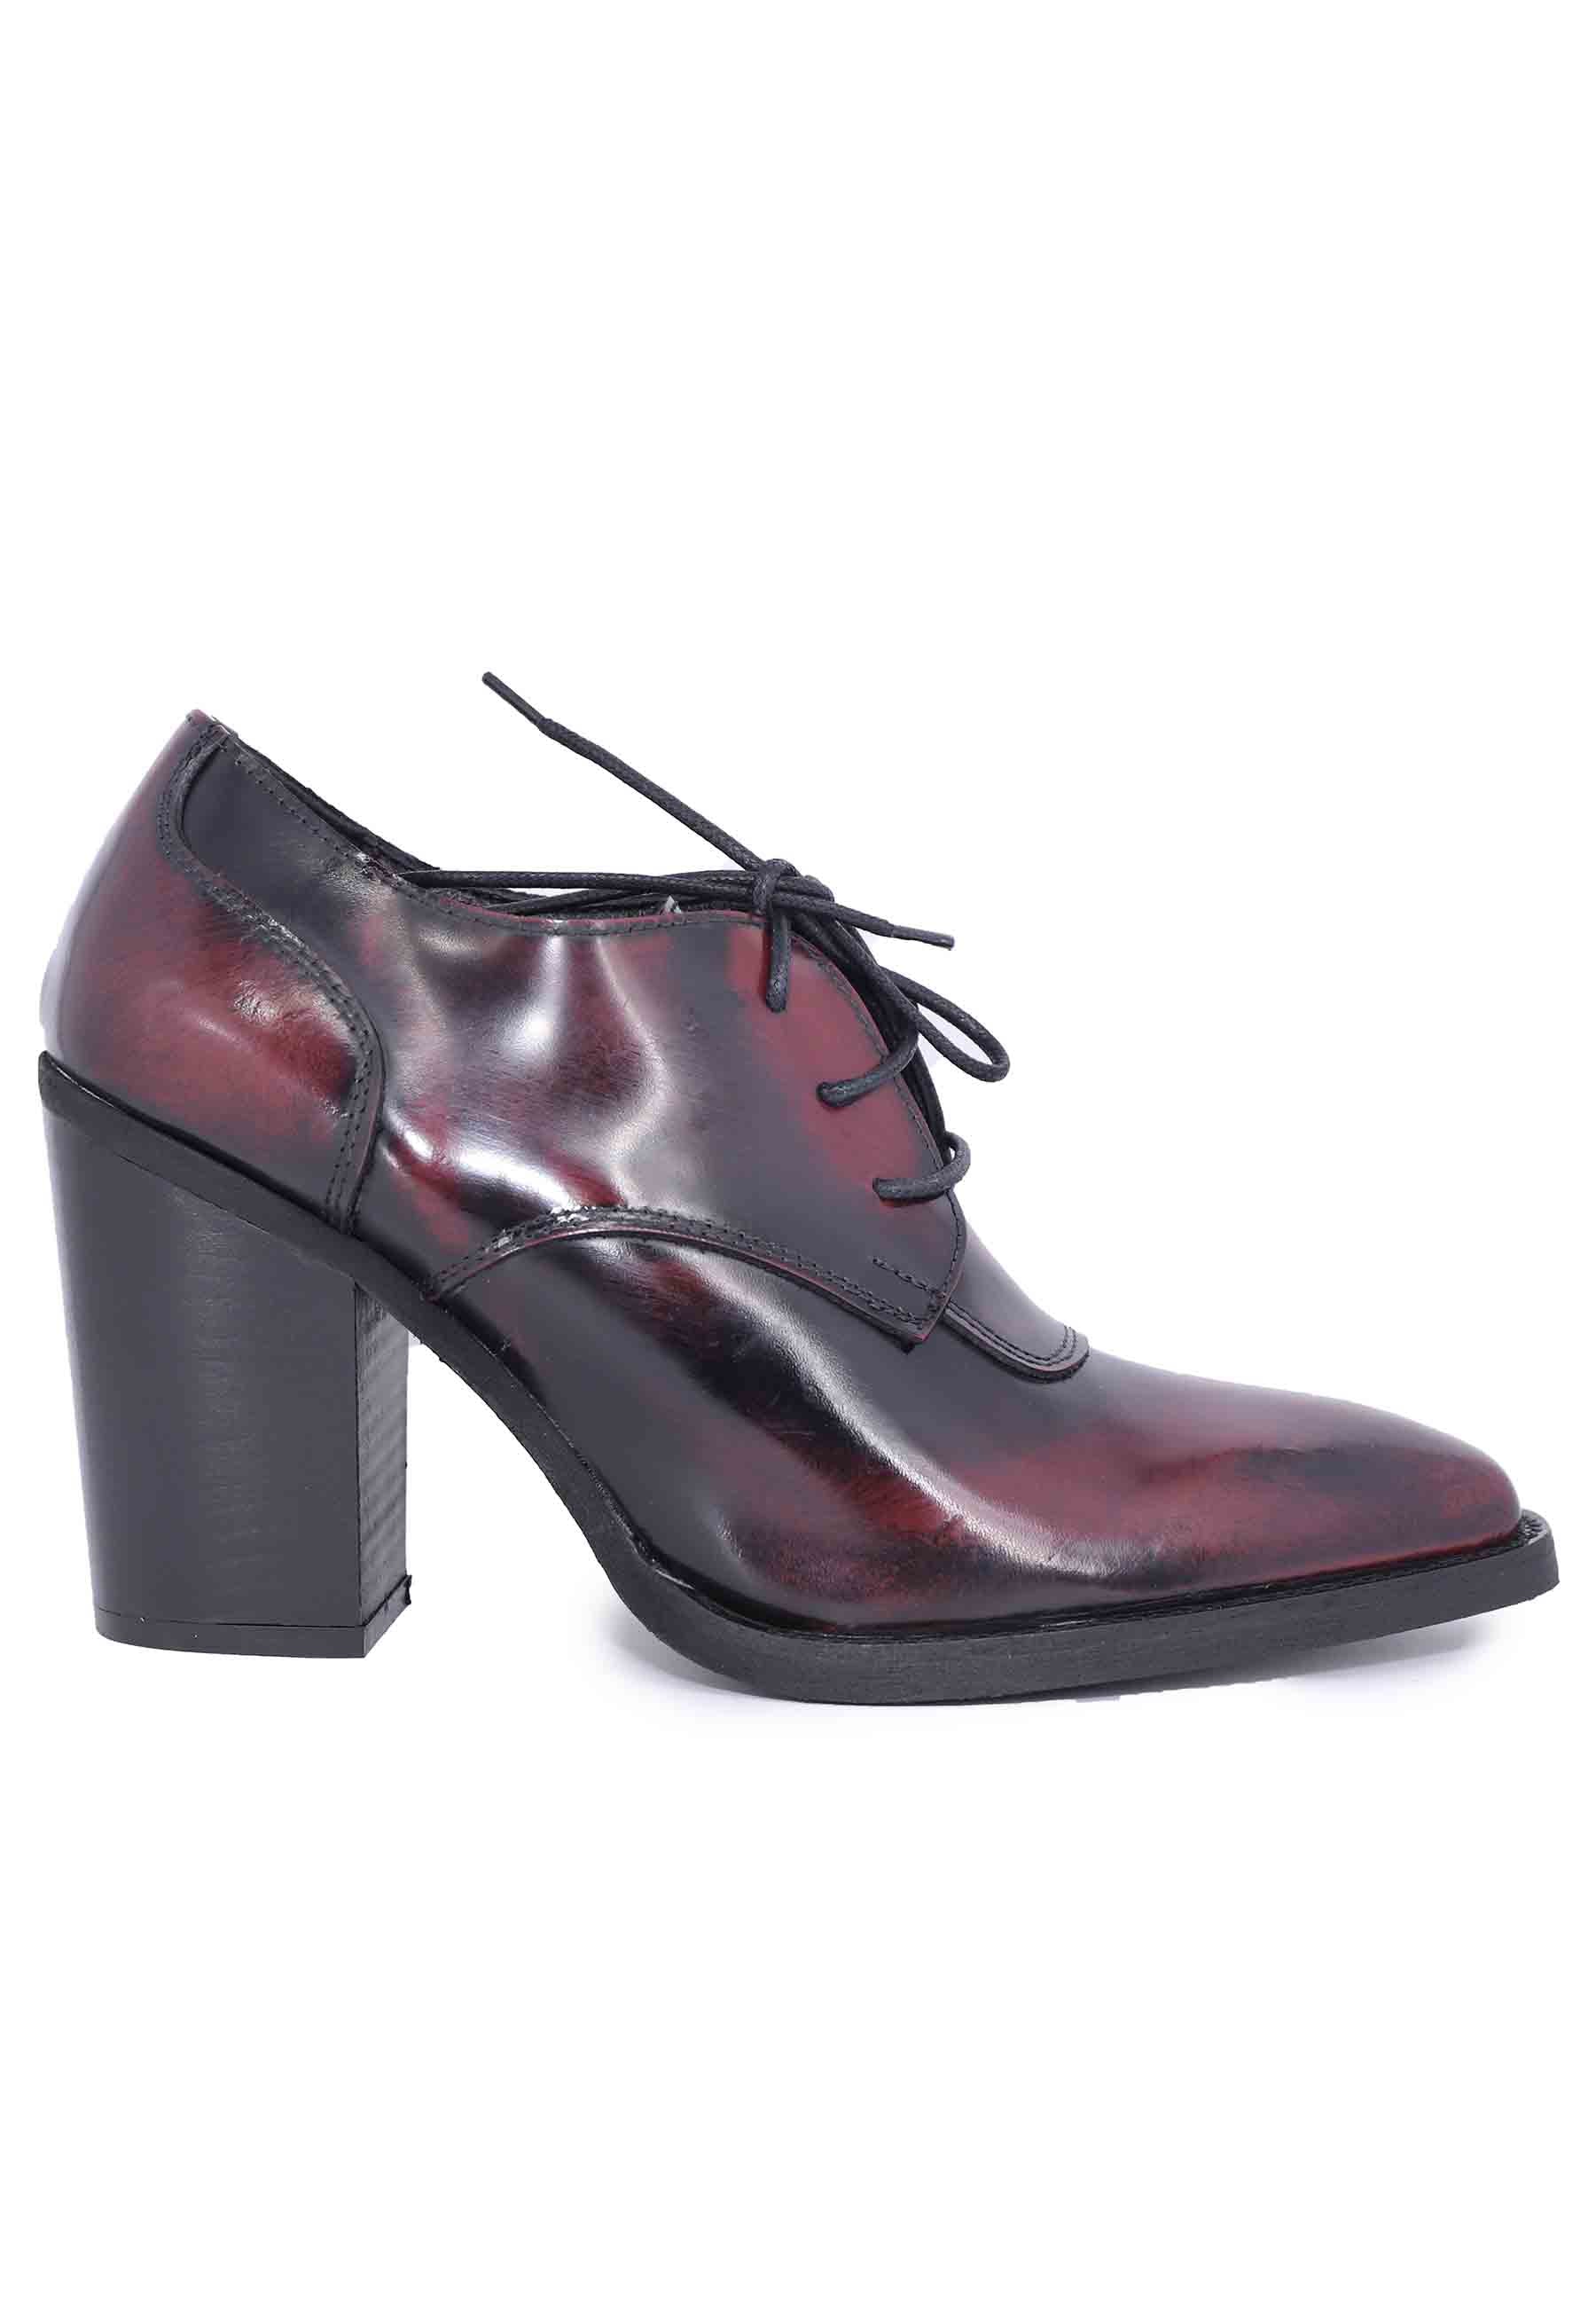 Women's burgundy leather lace-ups with high heel and pointed toe